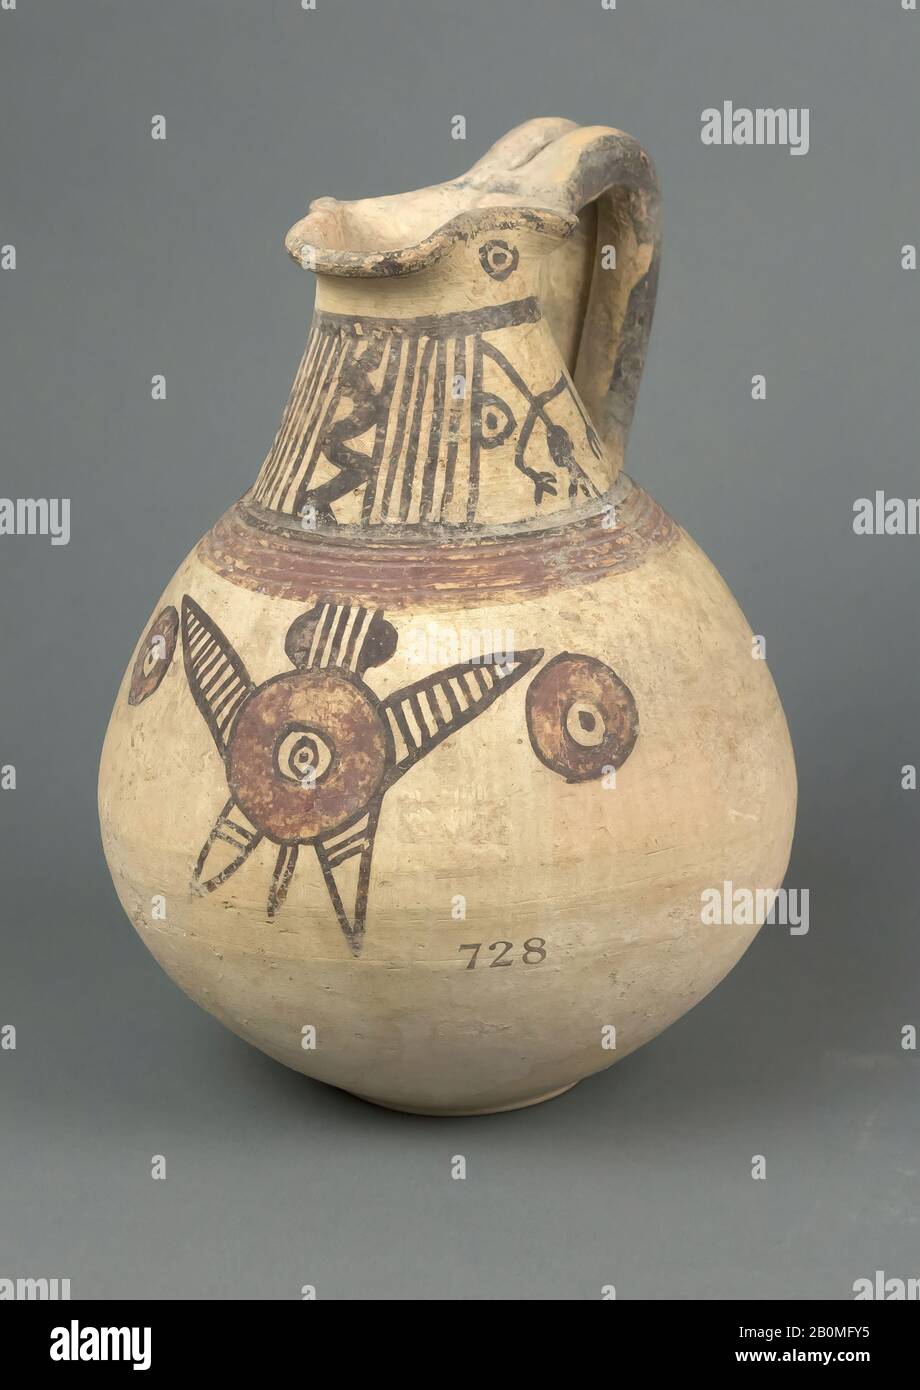 Jug, Cypriot, Cypro-Archaic I, Date 750–600 B.C., Cypriot, Terracotta, 6 3/4in. (17.2cm), Vases Stock Photo